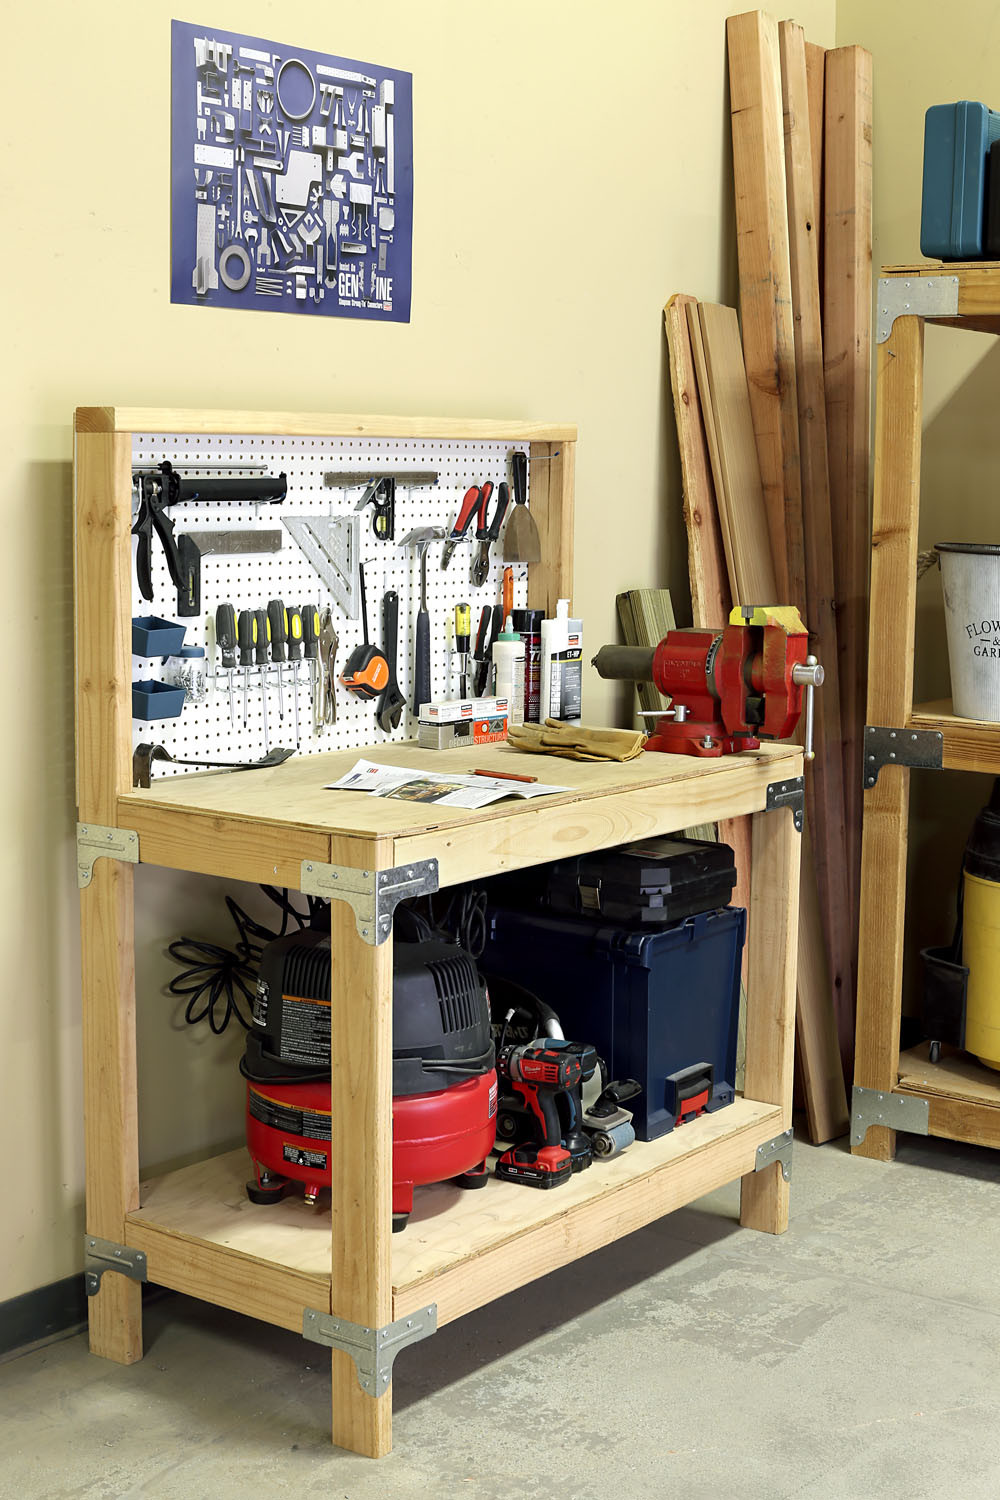 Garage Storage And Work Bench
 Father s Day Workbench Shelving Kit Giveaway